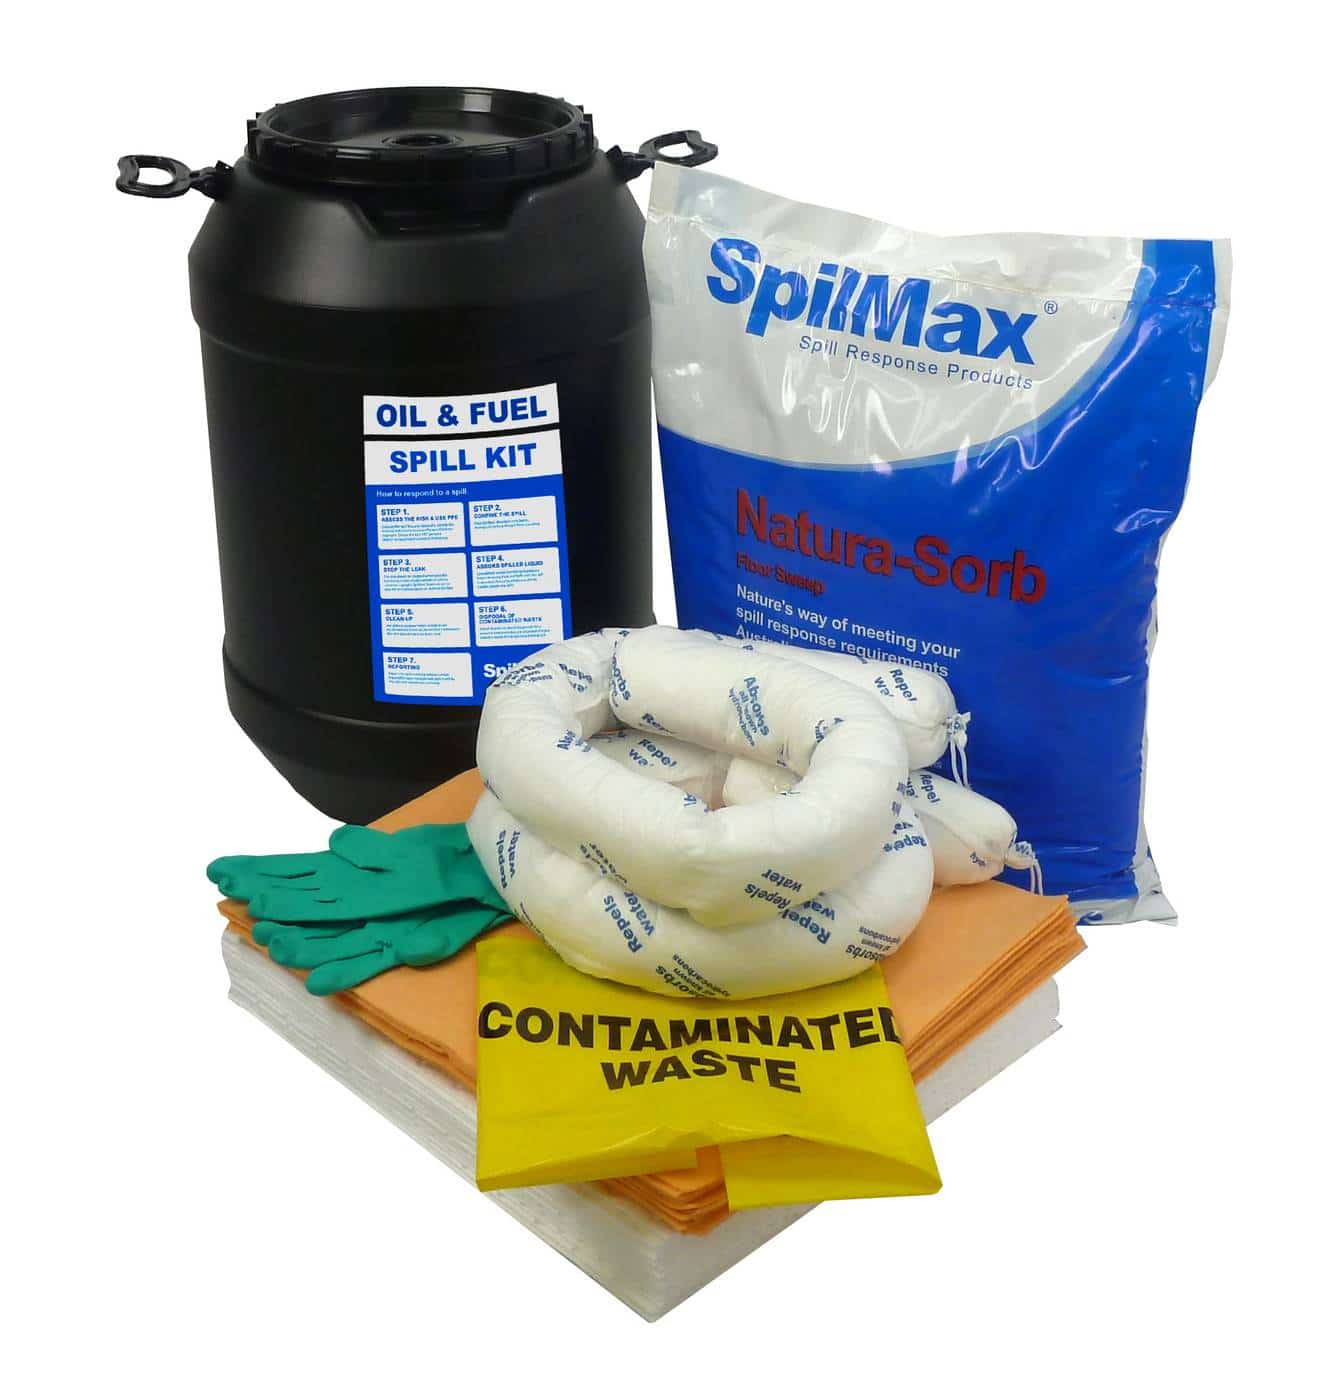 SpilMax 50L Oil & Fuel Vehicle Spill Kit Drum with contents showing